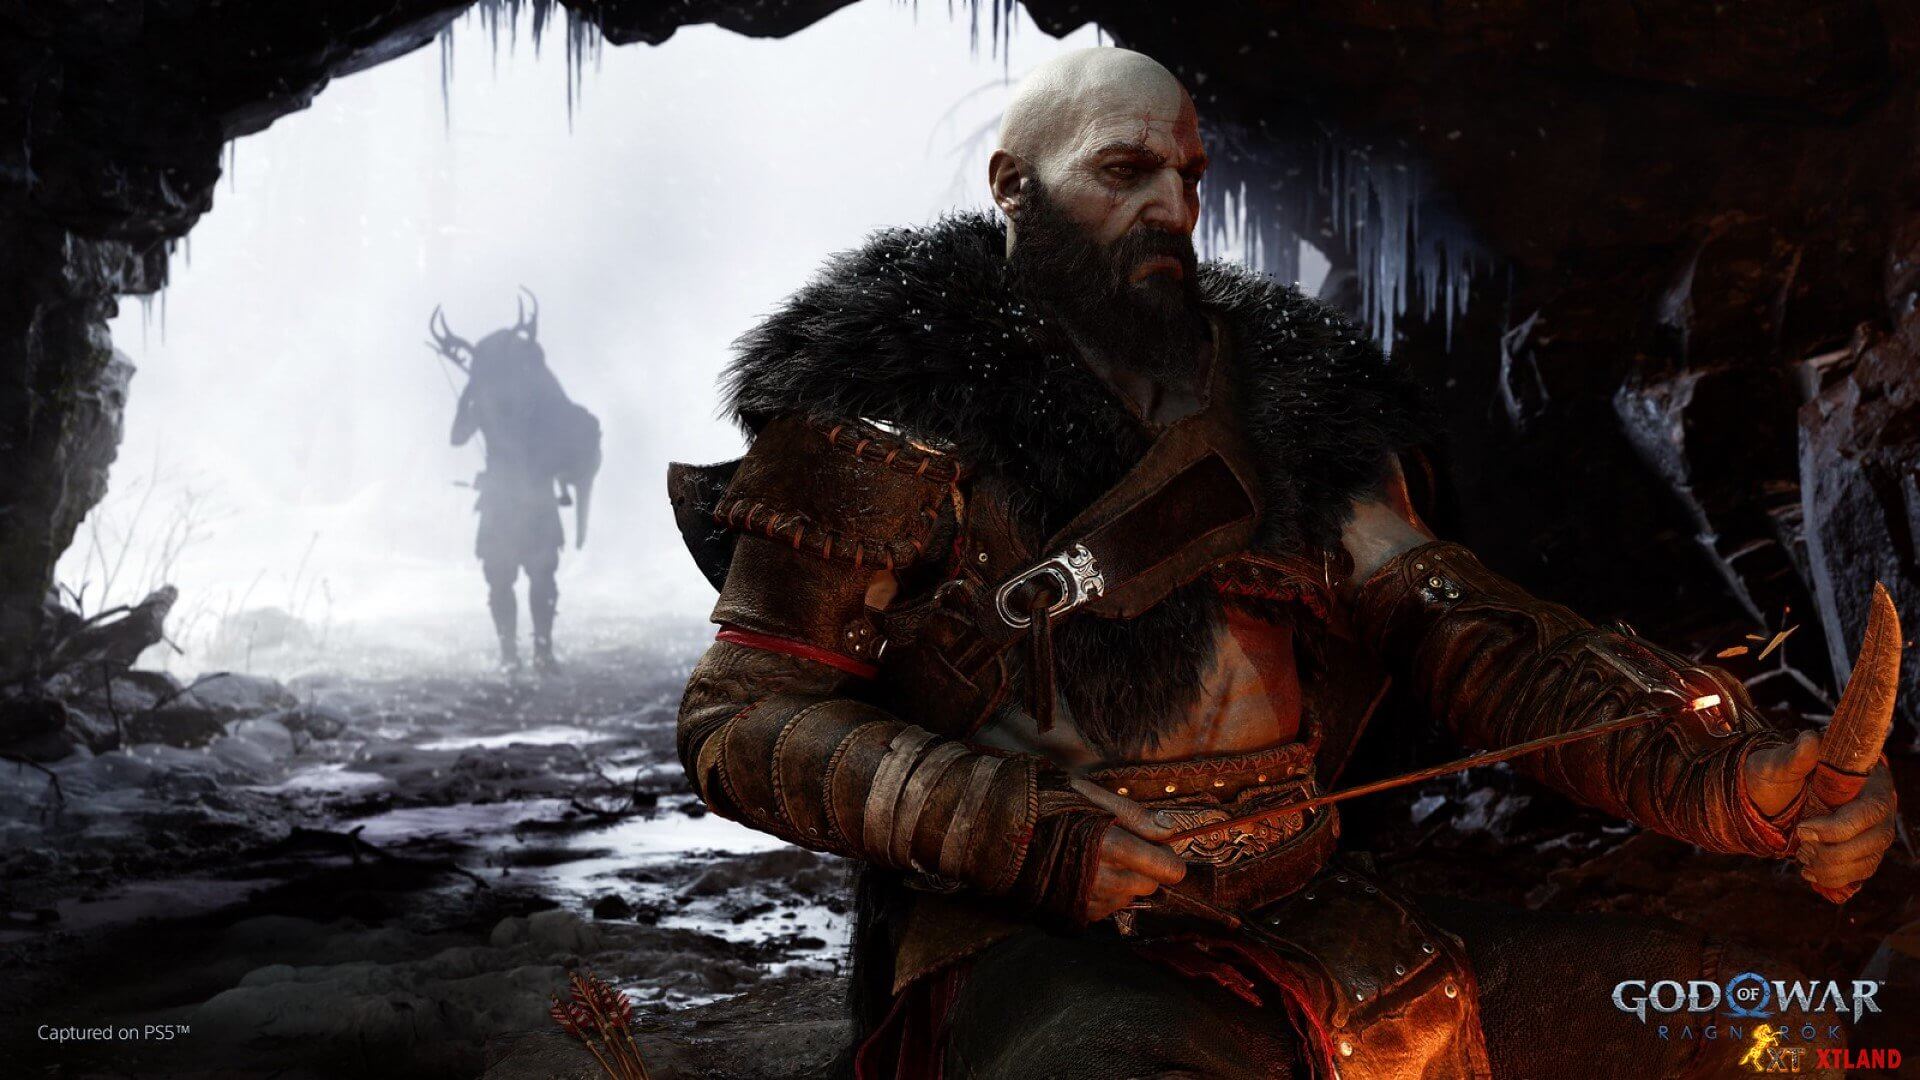 God of War Ragnarok is “Not Ready to be Shown” Yet